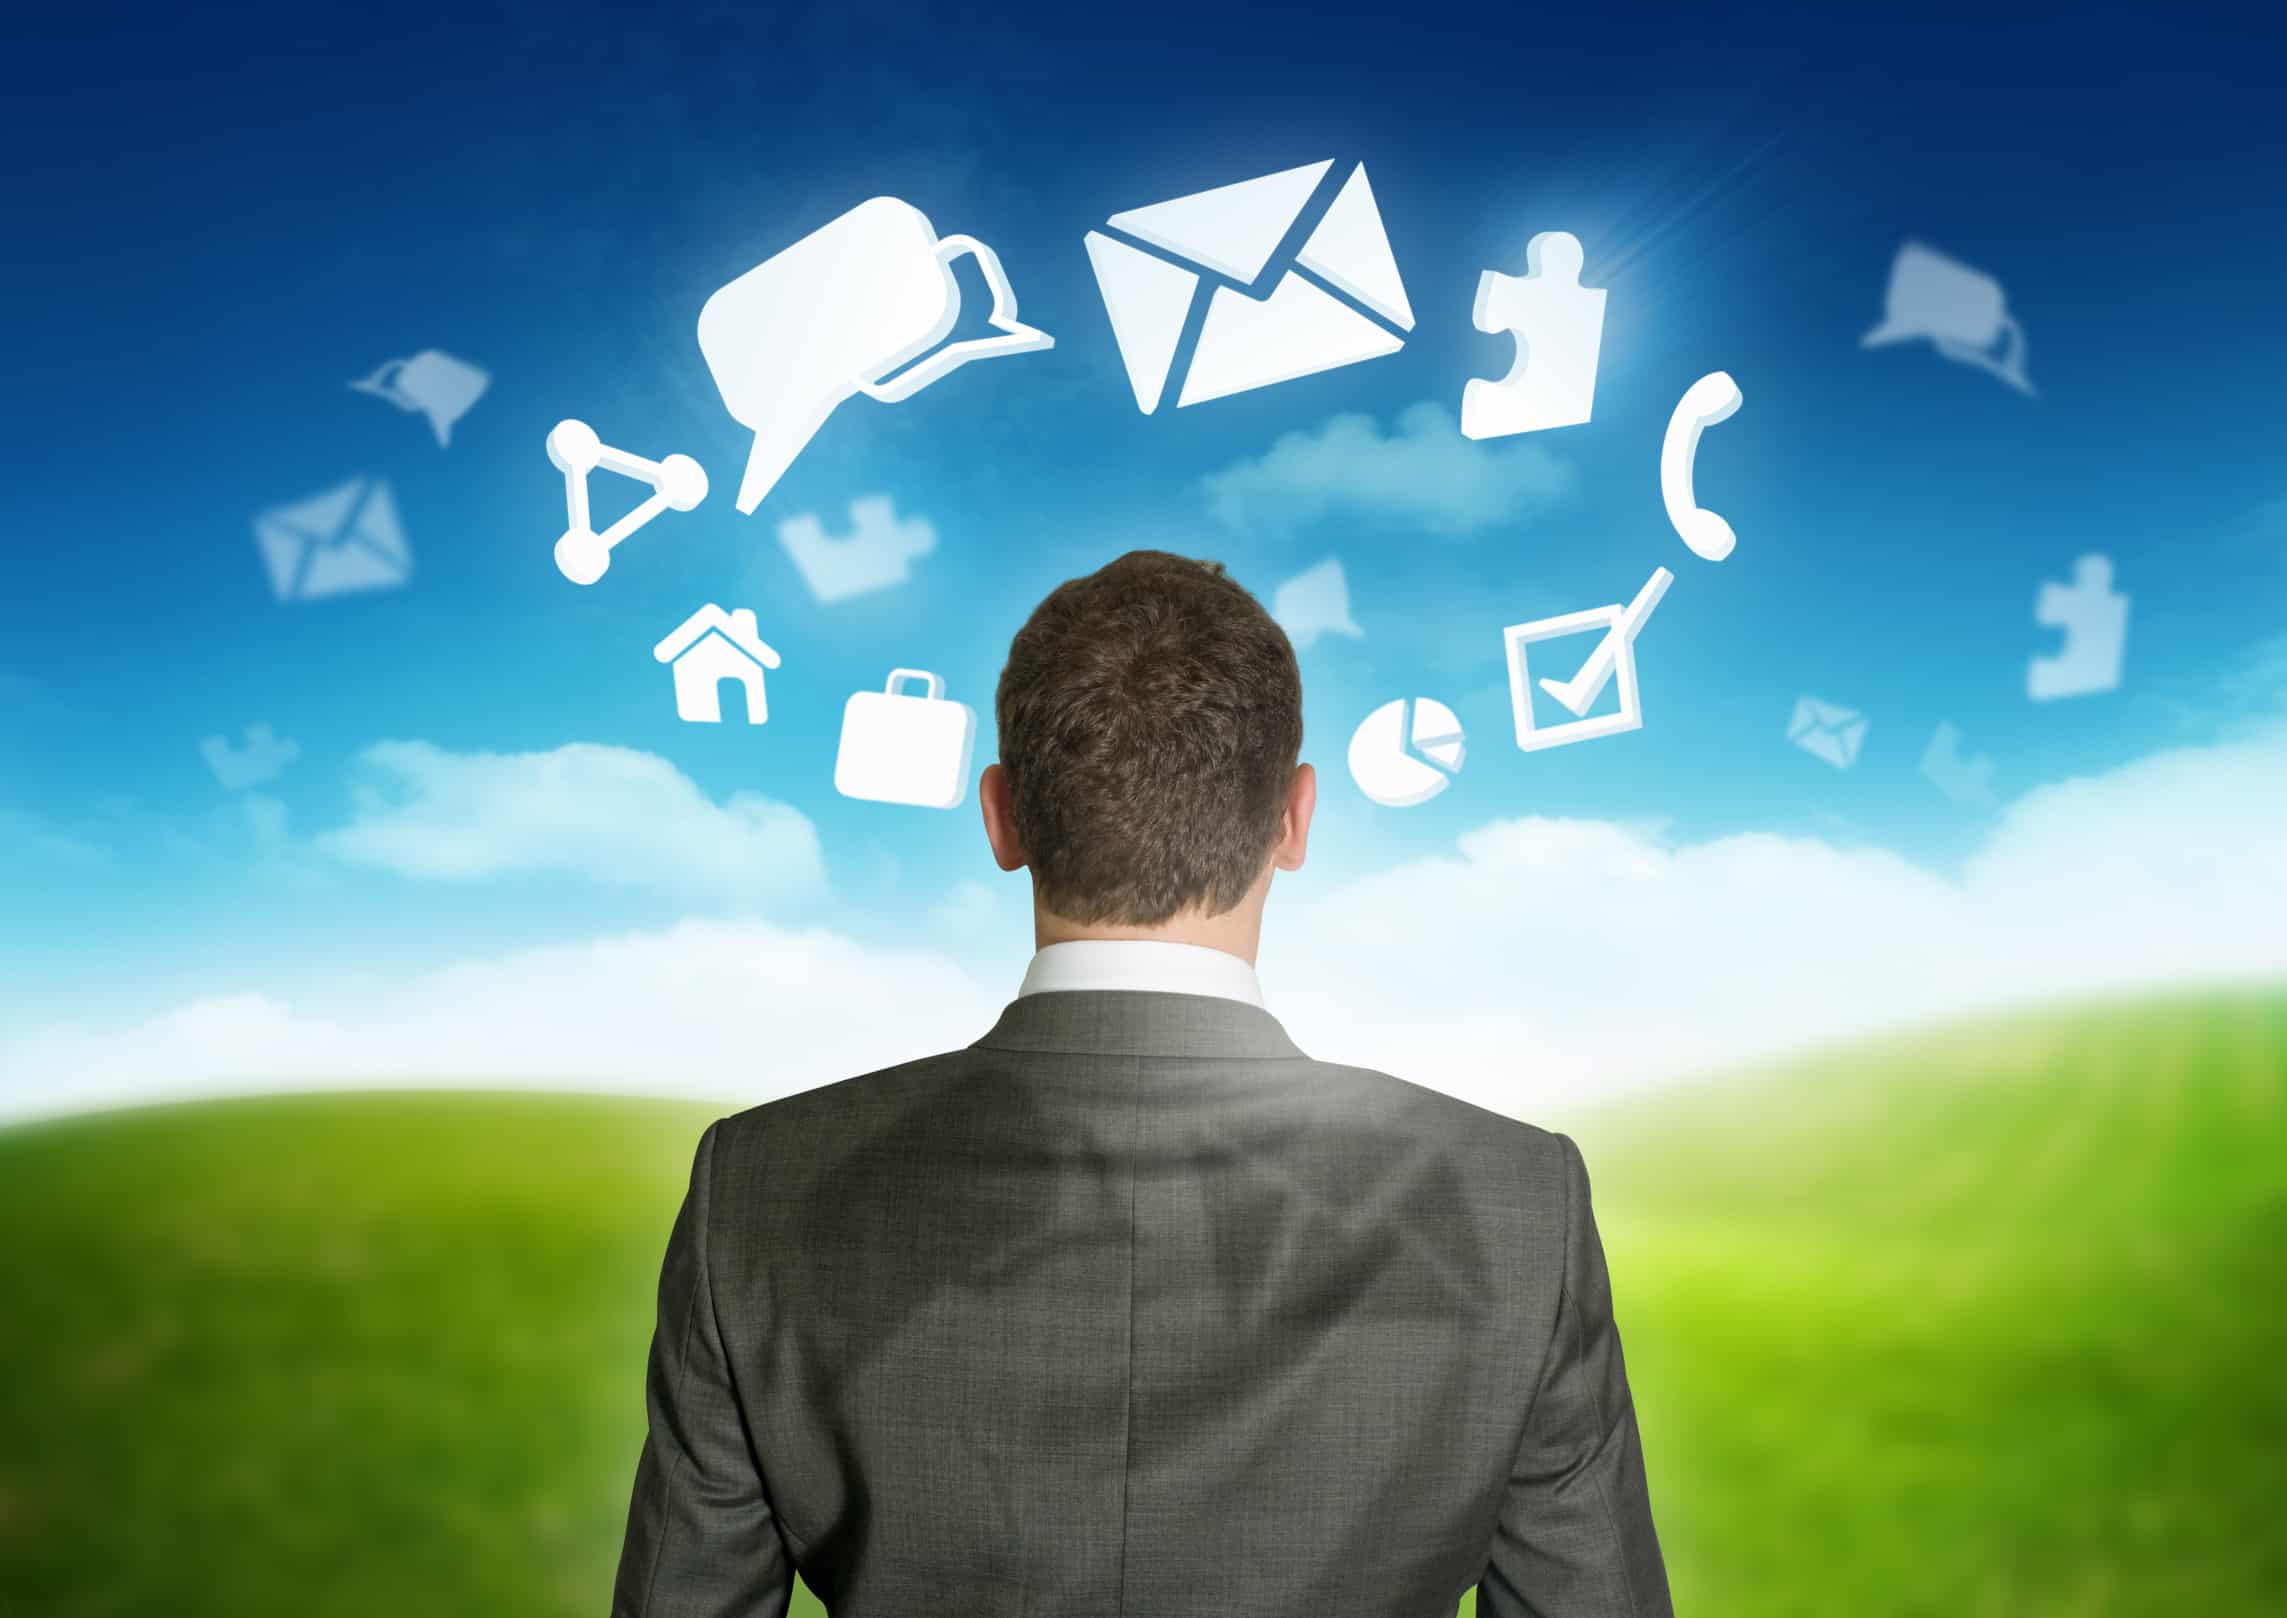 7 Tips to Make Your Email Marketing More Mobile-Friendly for Users